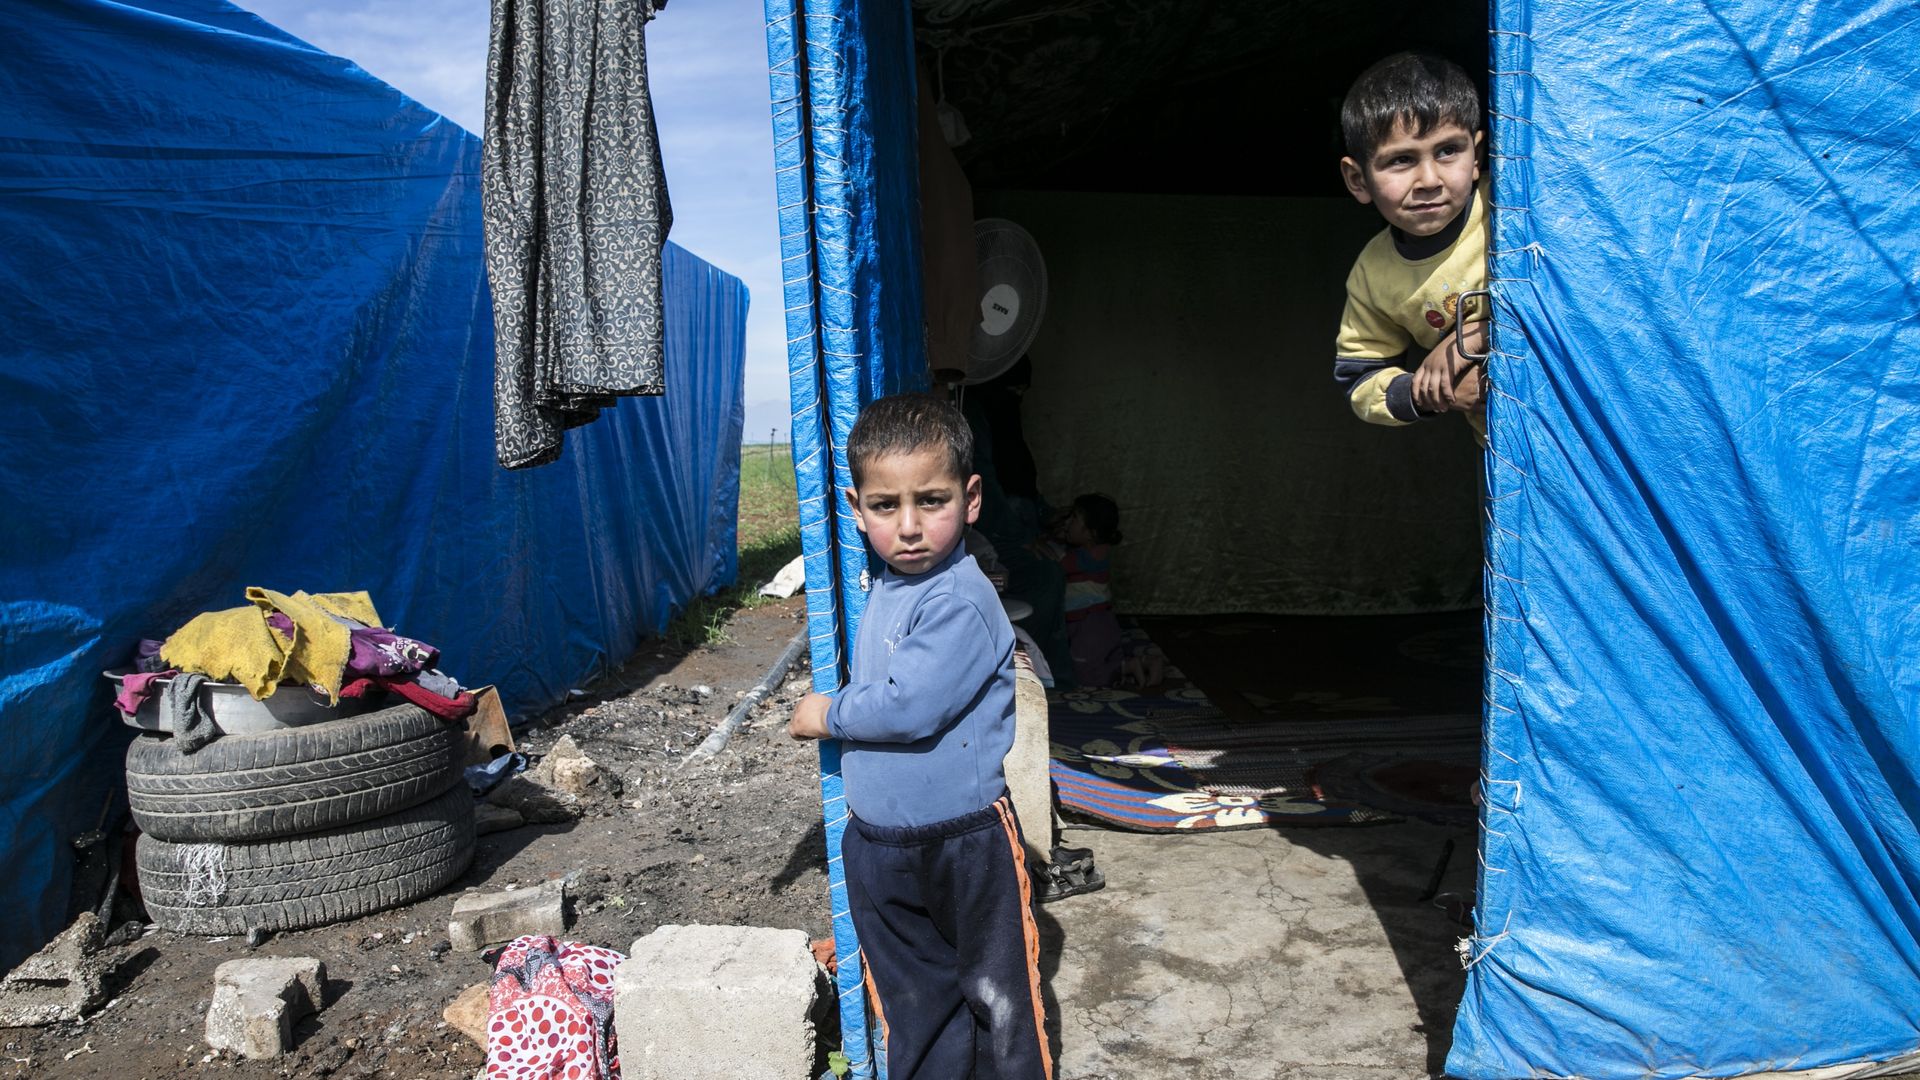 Syrian children next to a tent in a refugee camp